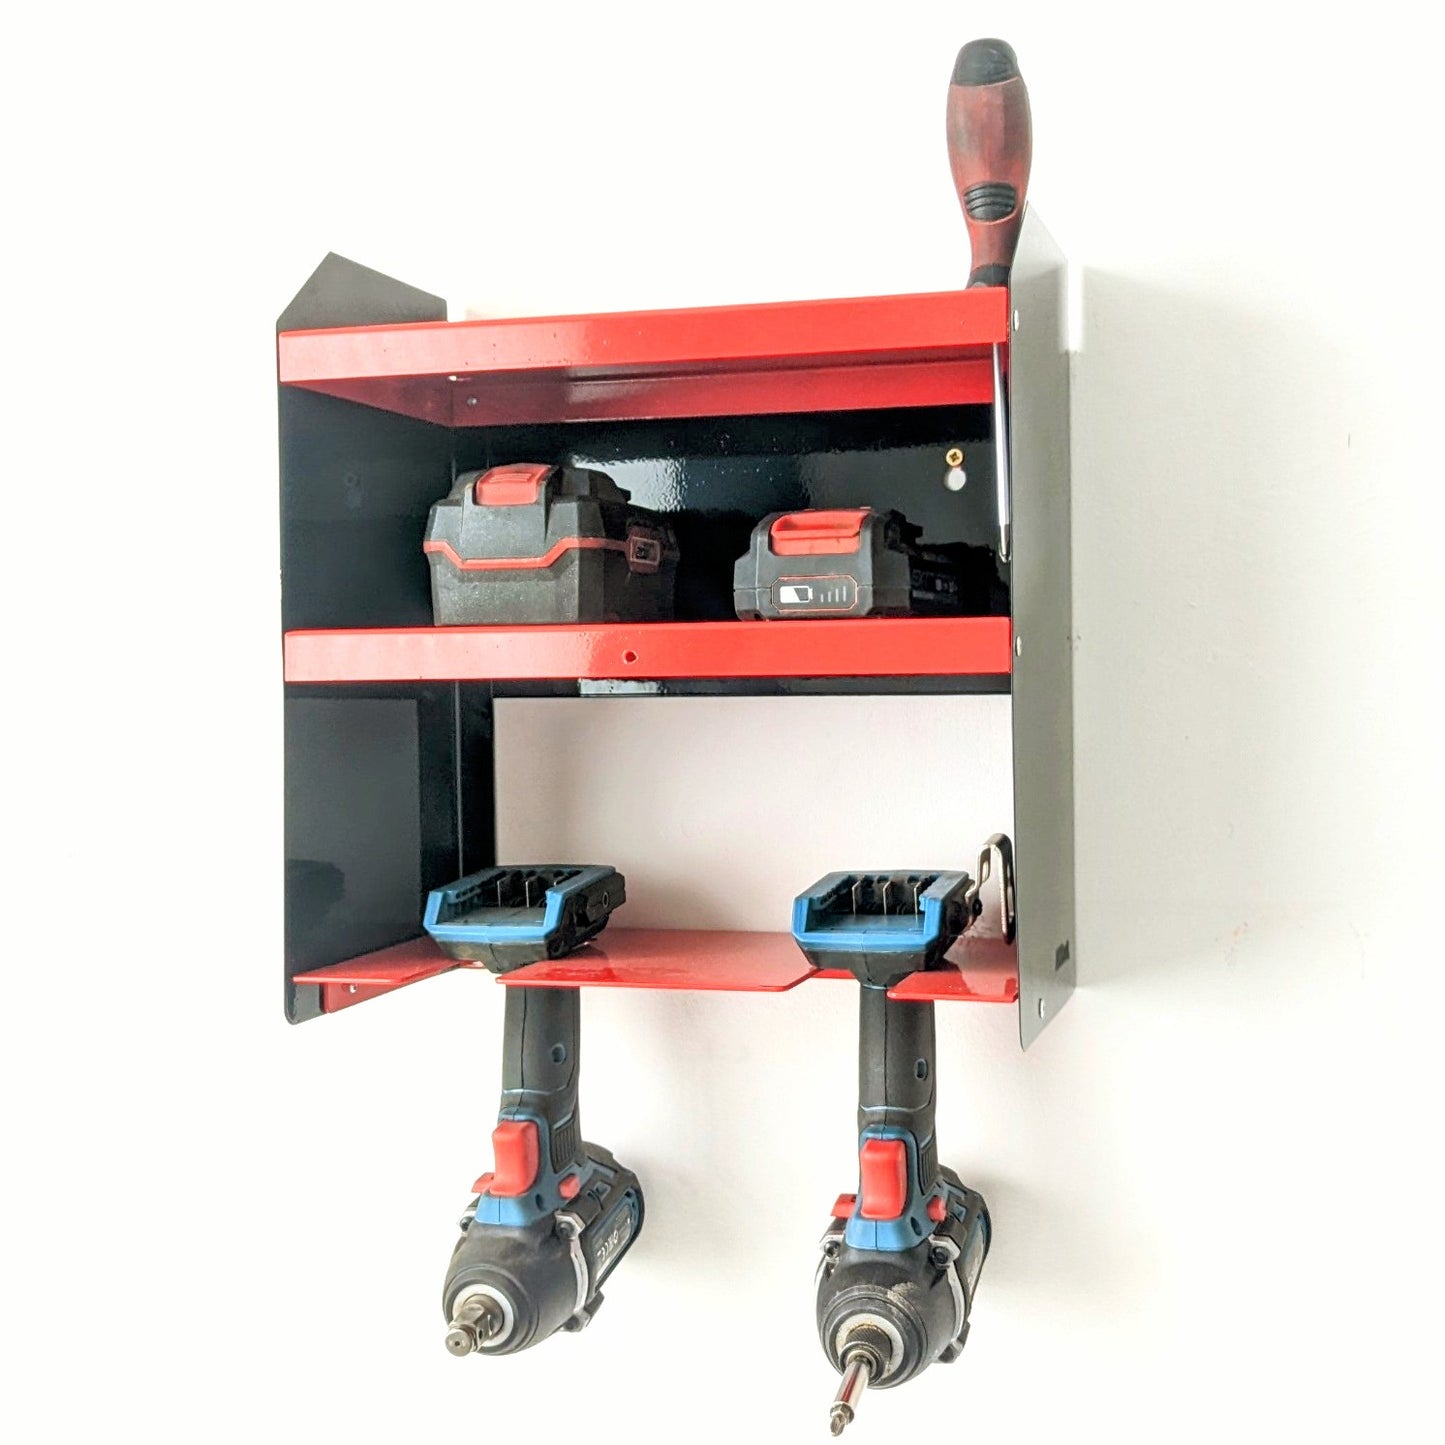 2 Drill Holder with 2 shelves